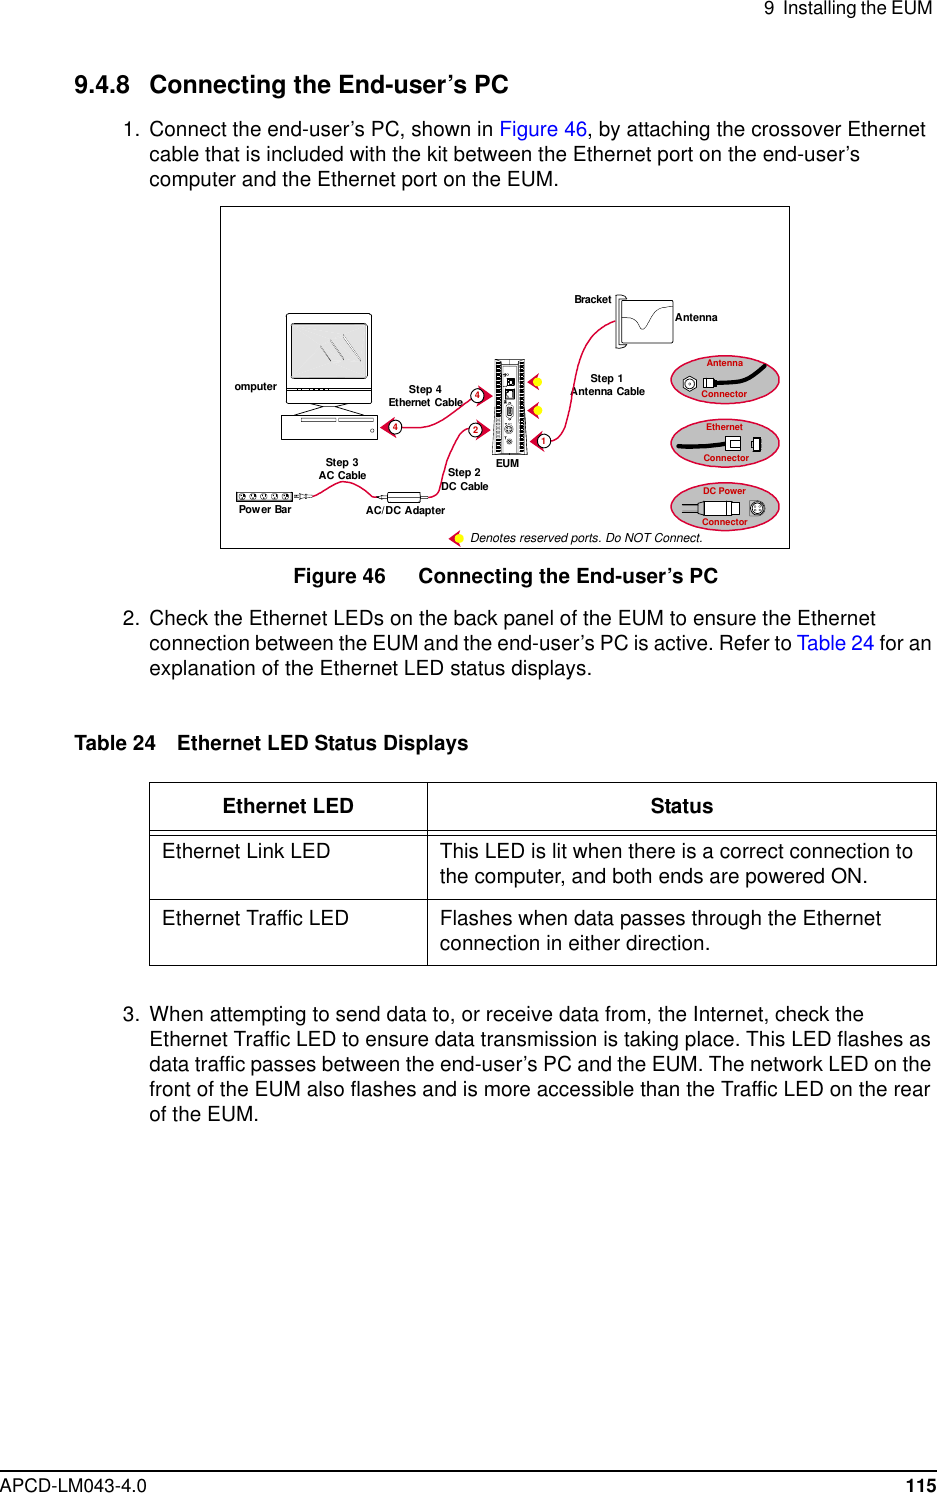 9 Installing the EUMAPCD-LM043-4.0 1159.4.8 Connecting the End-user’s PC1. Connect the end-user’s PC, shown in Figure 46, by attaching the crossover Ethernetcable that is included with the kit between the Ethernet port on the end-user’scomputer and the Ethernet port on the EUM.Figure 46 Connecting the End-user’s PC2. Check the Ethernet LEDs on the back panel of the EUM to ensure the Ethernetconnection between the EUM and the end-user’s PC is active. Refer to Table 24 for anexplanation of the Ethernet LED status displays.Table 24 Ethernet LED Status Displays3. When attempting to send data to, or receive data from, the Internet, check theEthernet Traffic LED to ensure data transmission is taking place. This LED flashes asdata traffic passes between the end-user’s PC and the EUM. The network LED on thefront of the EUM also flashes and is more accessible than the Traffic LED on the rearof the EUM.Ethernet LED StatusEthernet Link LED This LED is lit when there is a correct connection tothe computer, and both ends are powered ON.Ethernet Traffic LED Flashes when data passes through the Ethernetconnection in either direction.Denotes reserved ports. Do NOT Connect.omputer2AC/DC AdapterPow er BarEUMStep 1Antenna CableStep 4Ethernet CableStep 3AC Cable Step 2DC CableAntennaBracketAntennaConnectorDC PowerConnectorEthernetConnector441